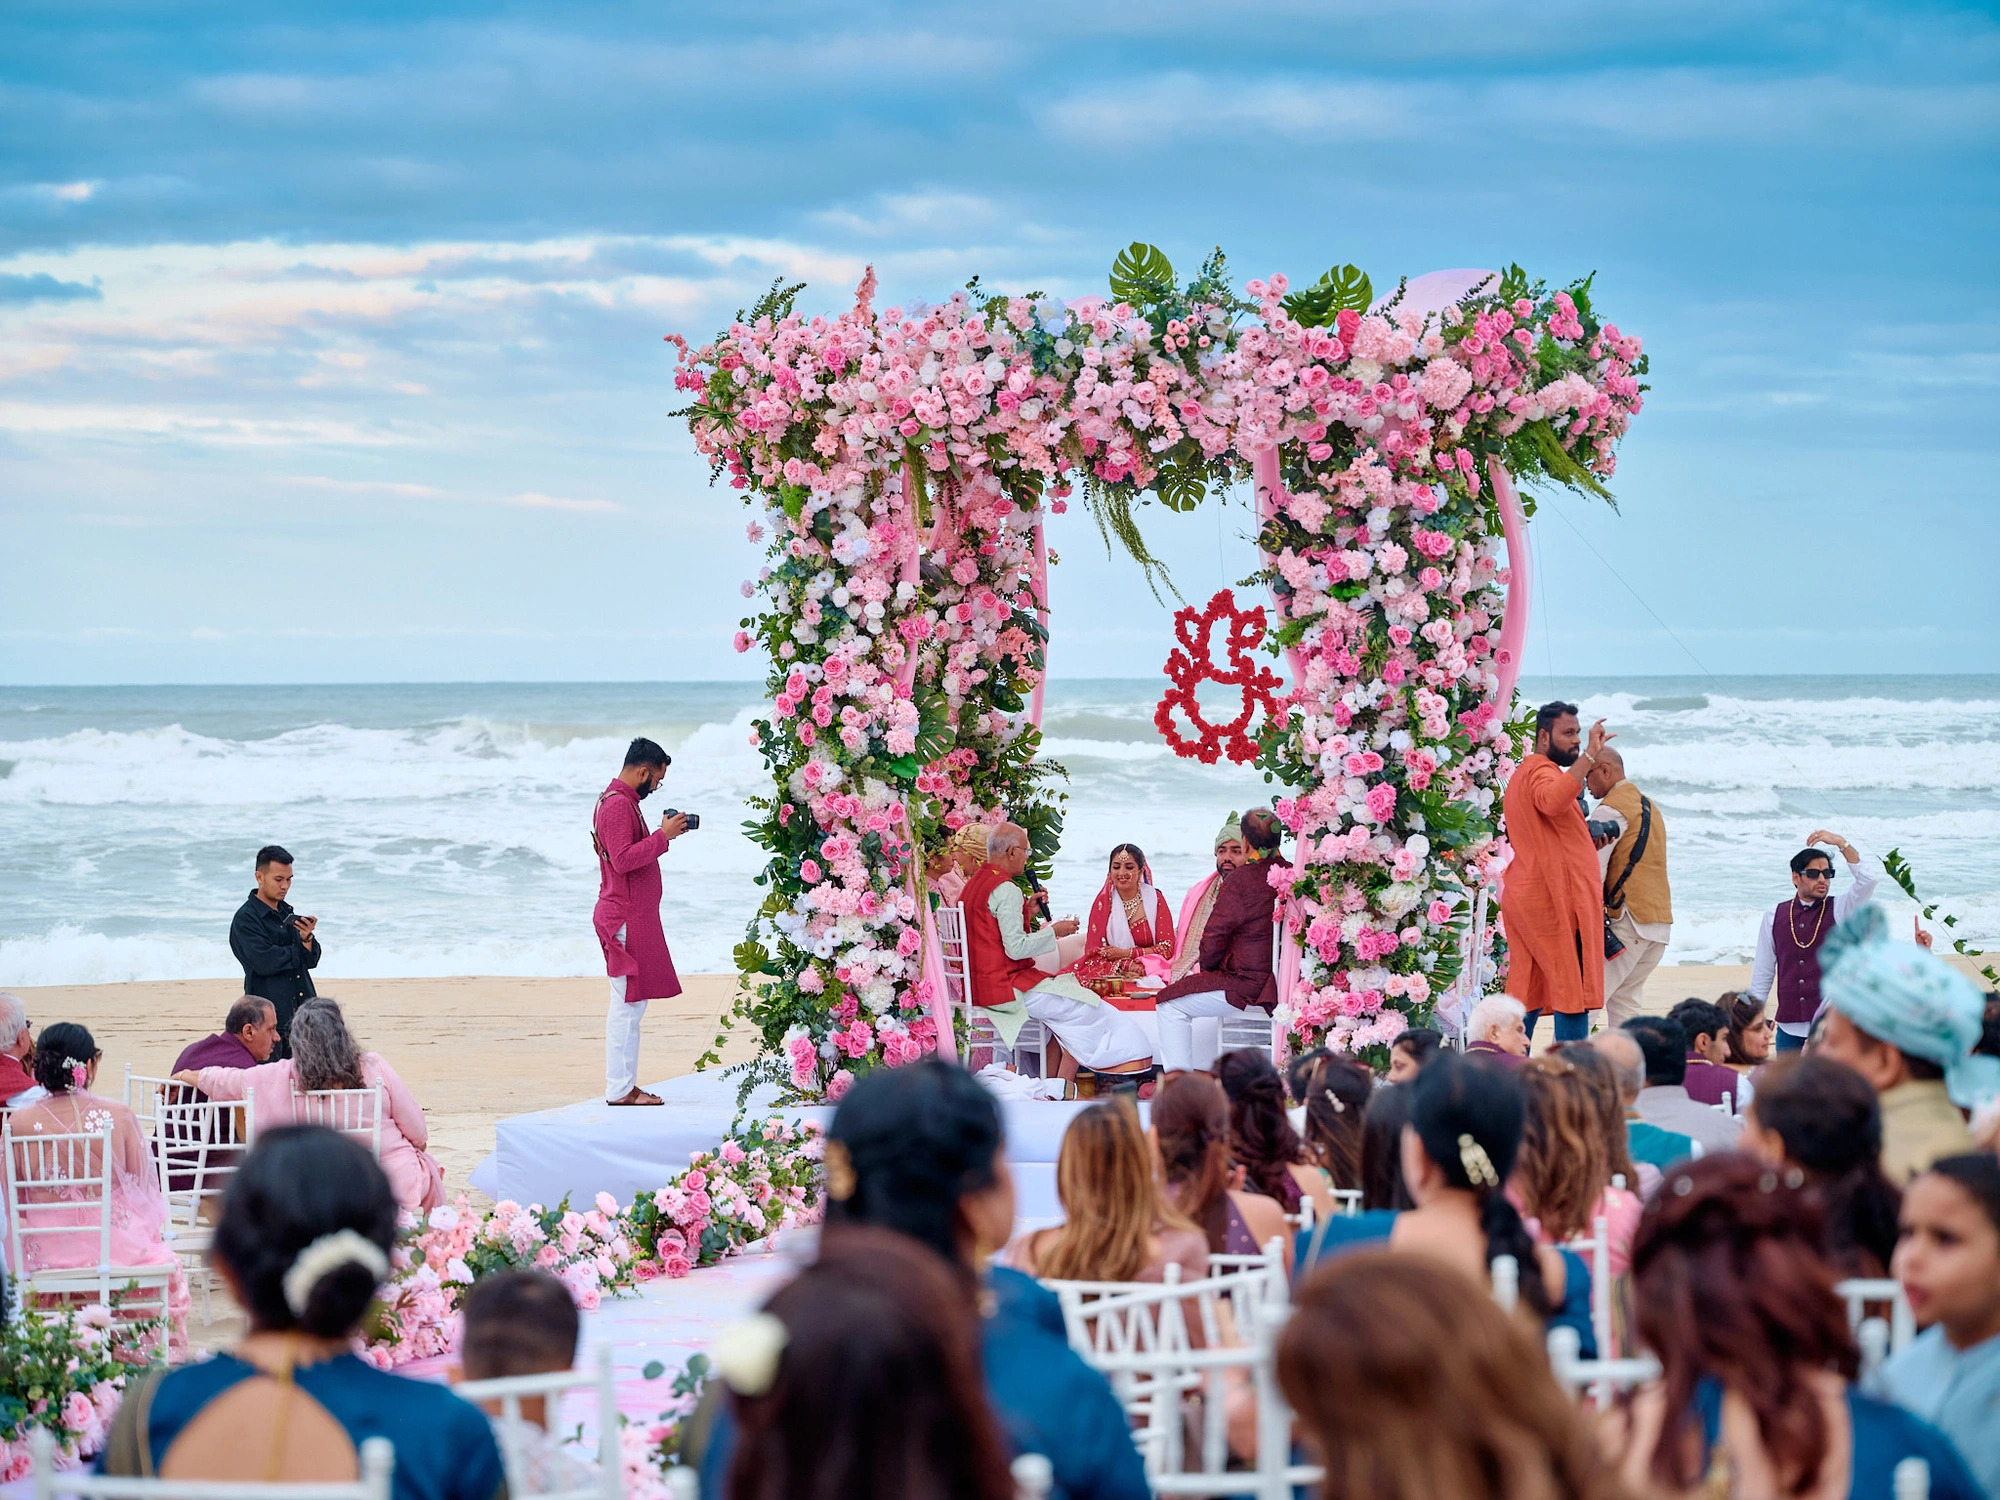 The guests had a wonderful time experiencing the beautiful wedding traditions of India at a beach in Danang. Photo: Supplied